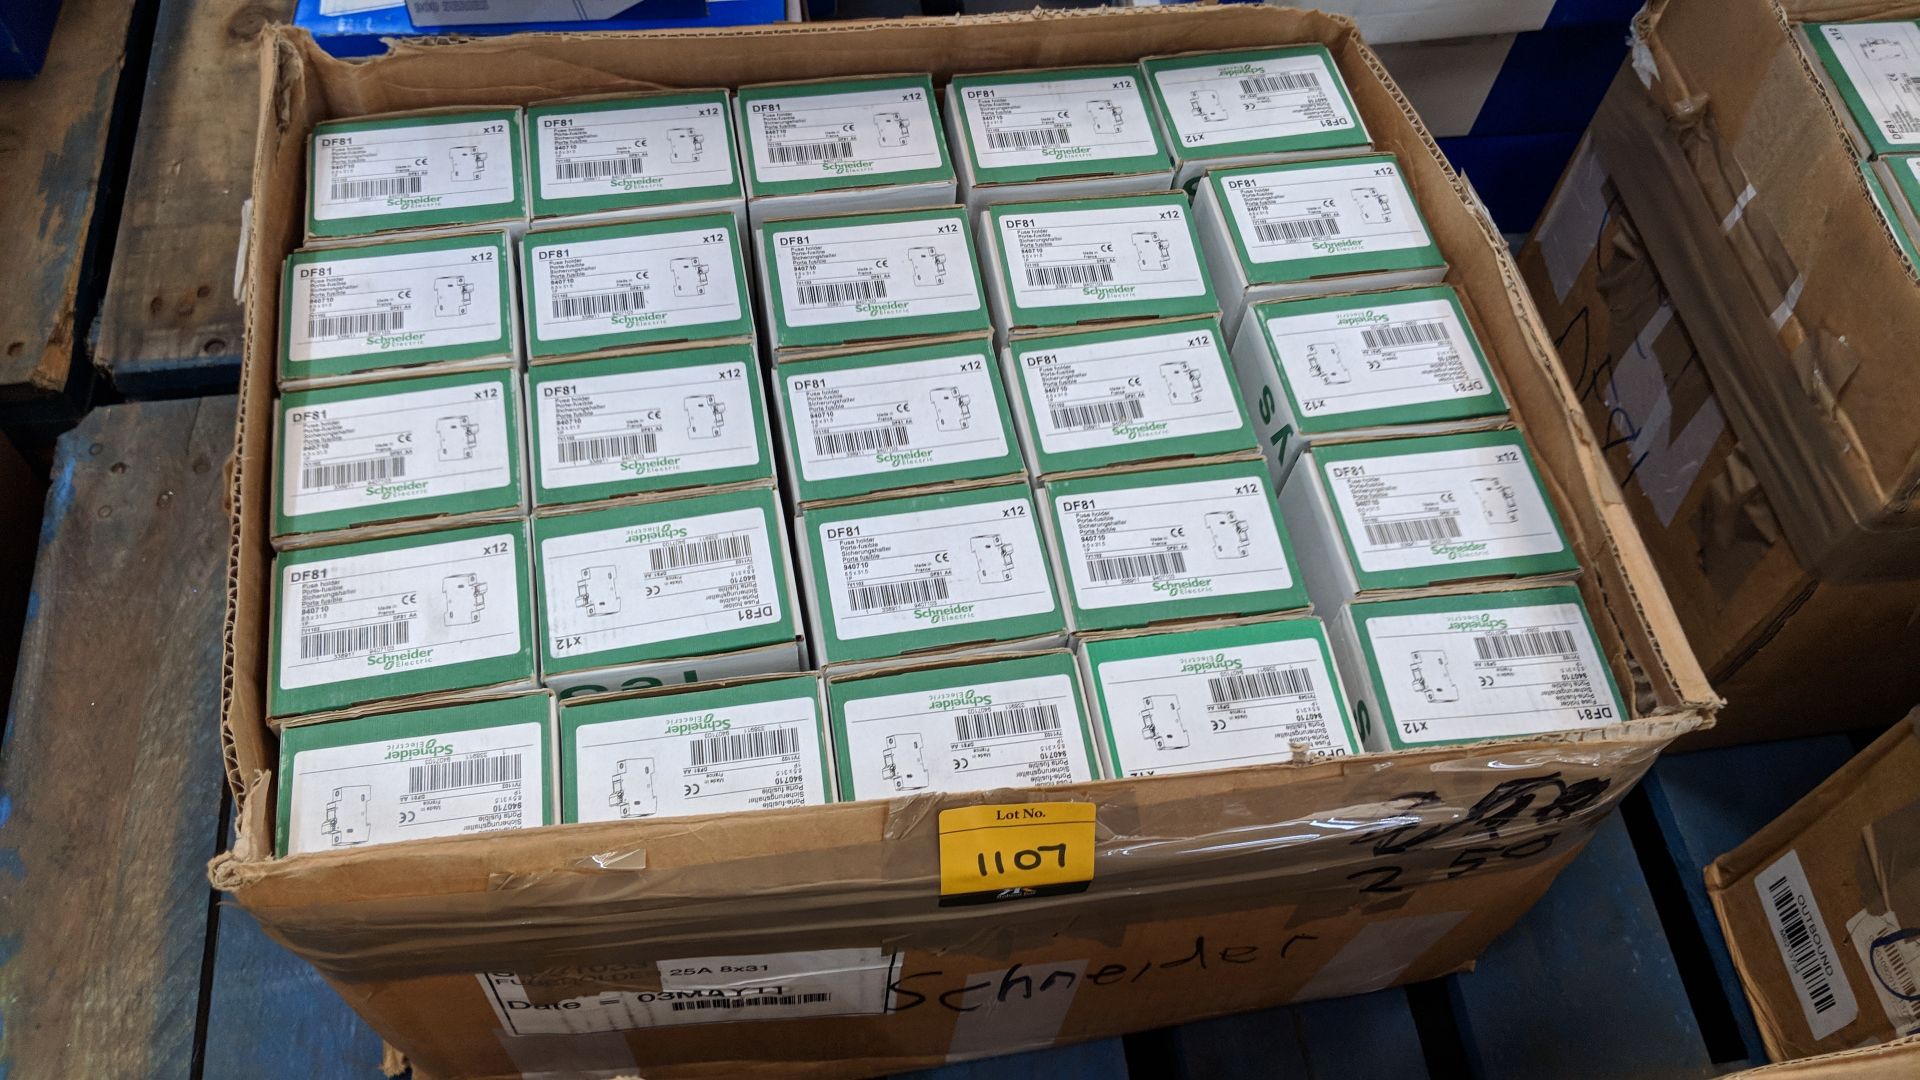 Approx. 300 off Schneider Electric fuse holders The vast majority of products in this auction appear